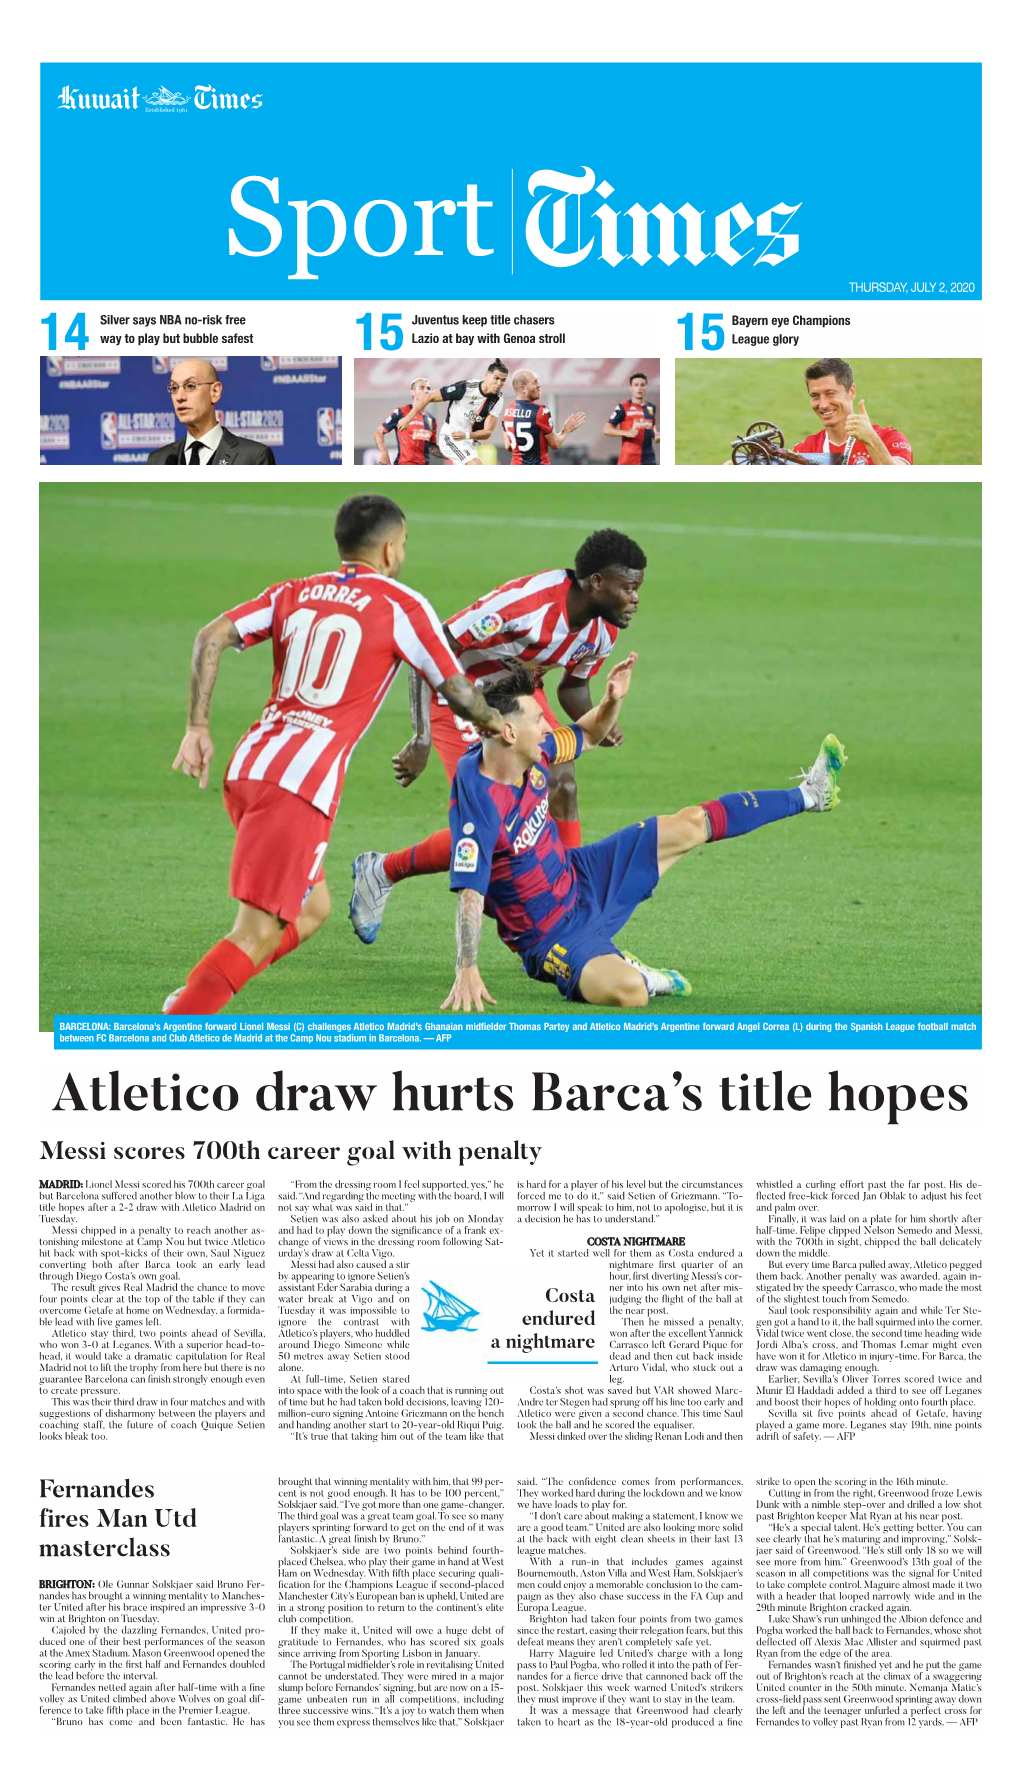 Atletico Draw Hurts Barca's Title Hopes